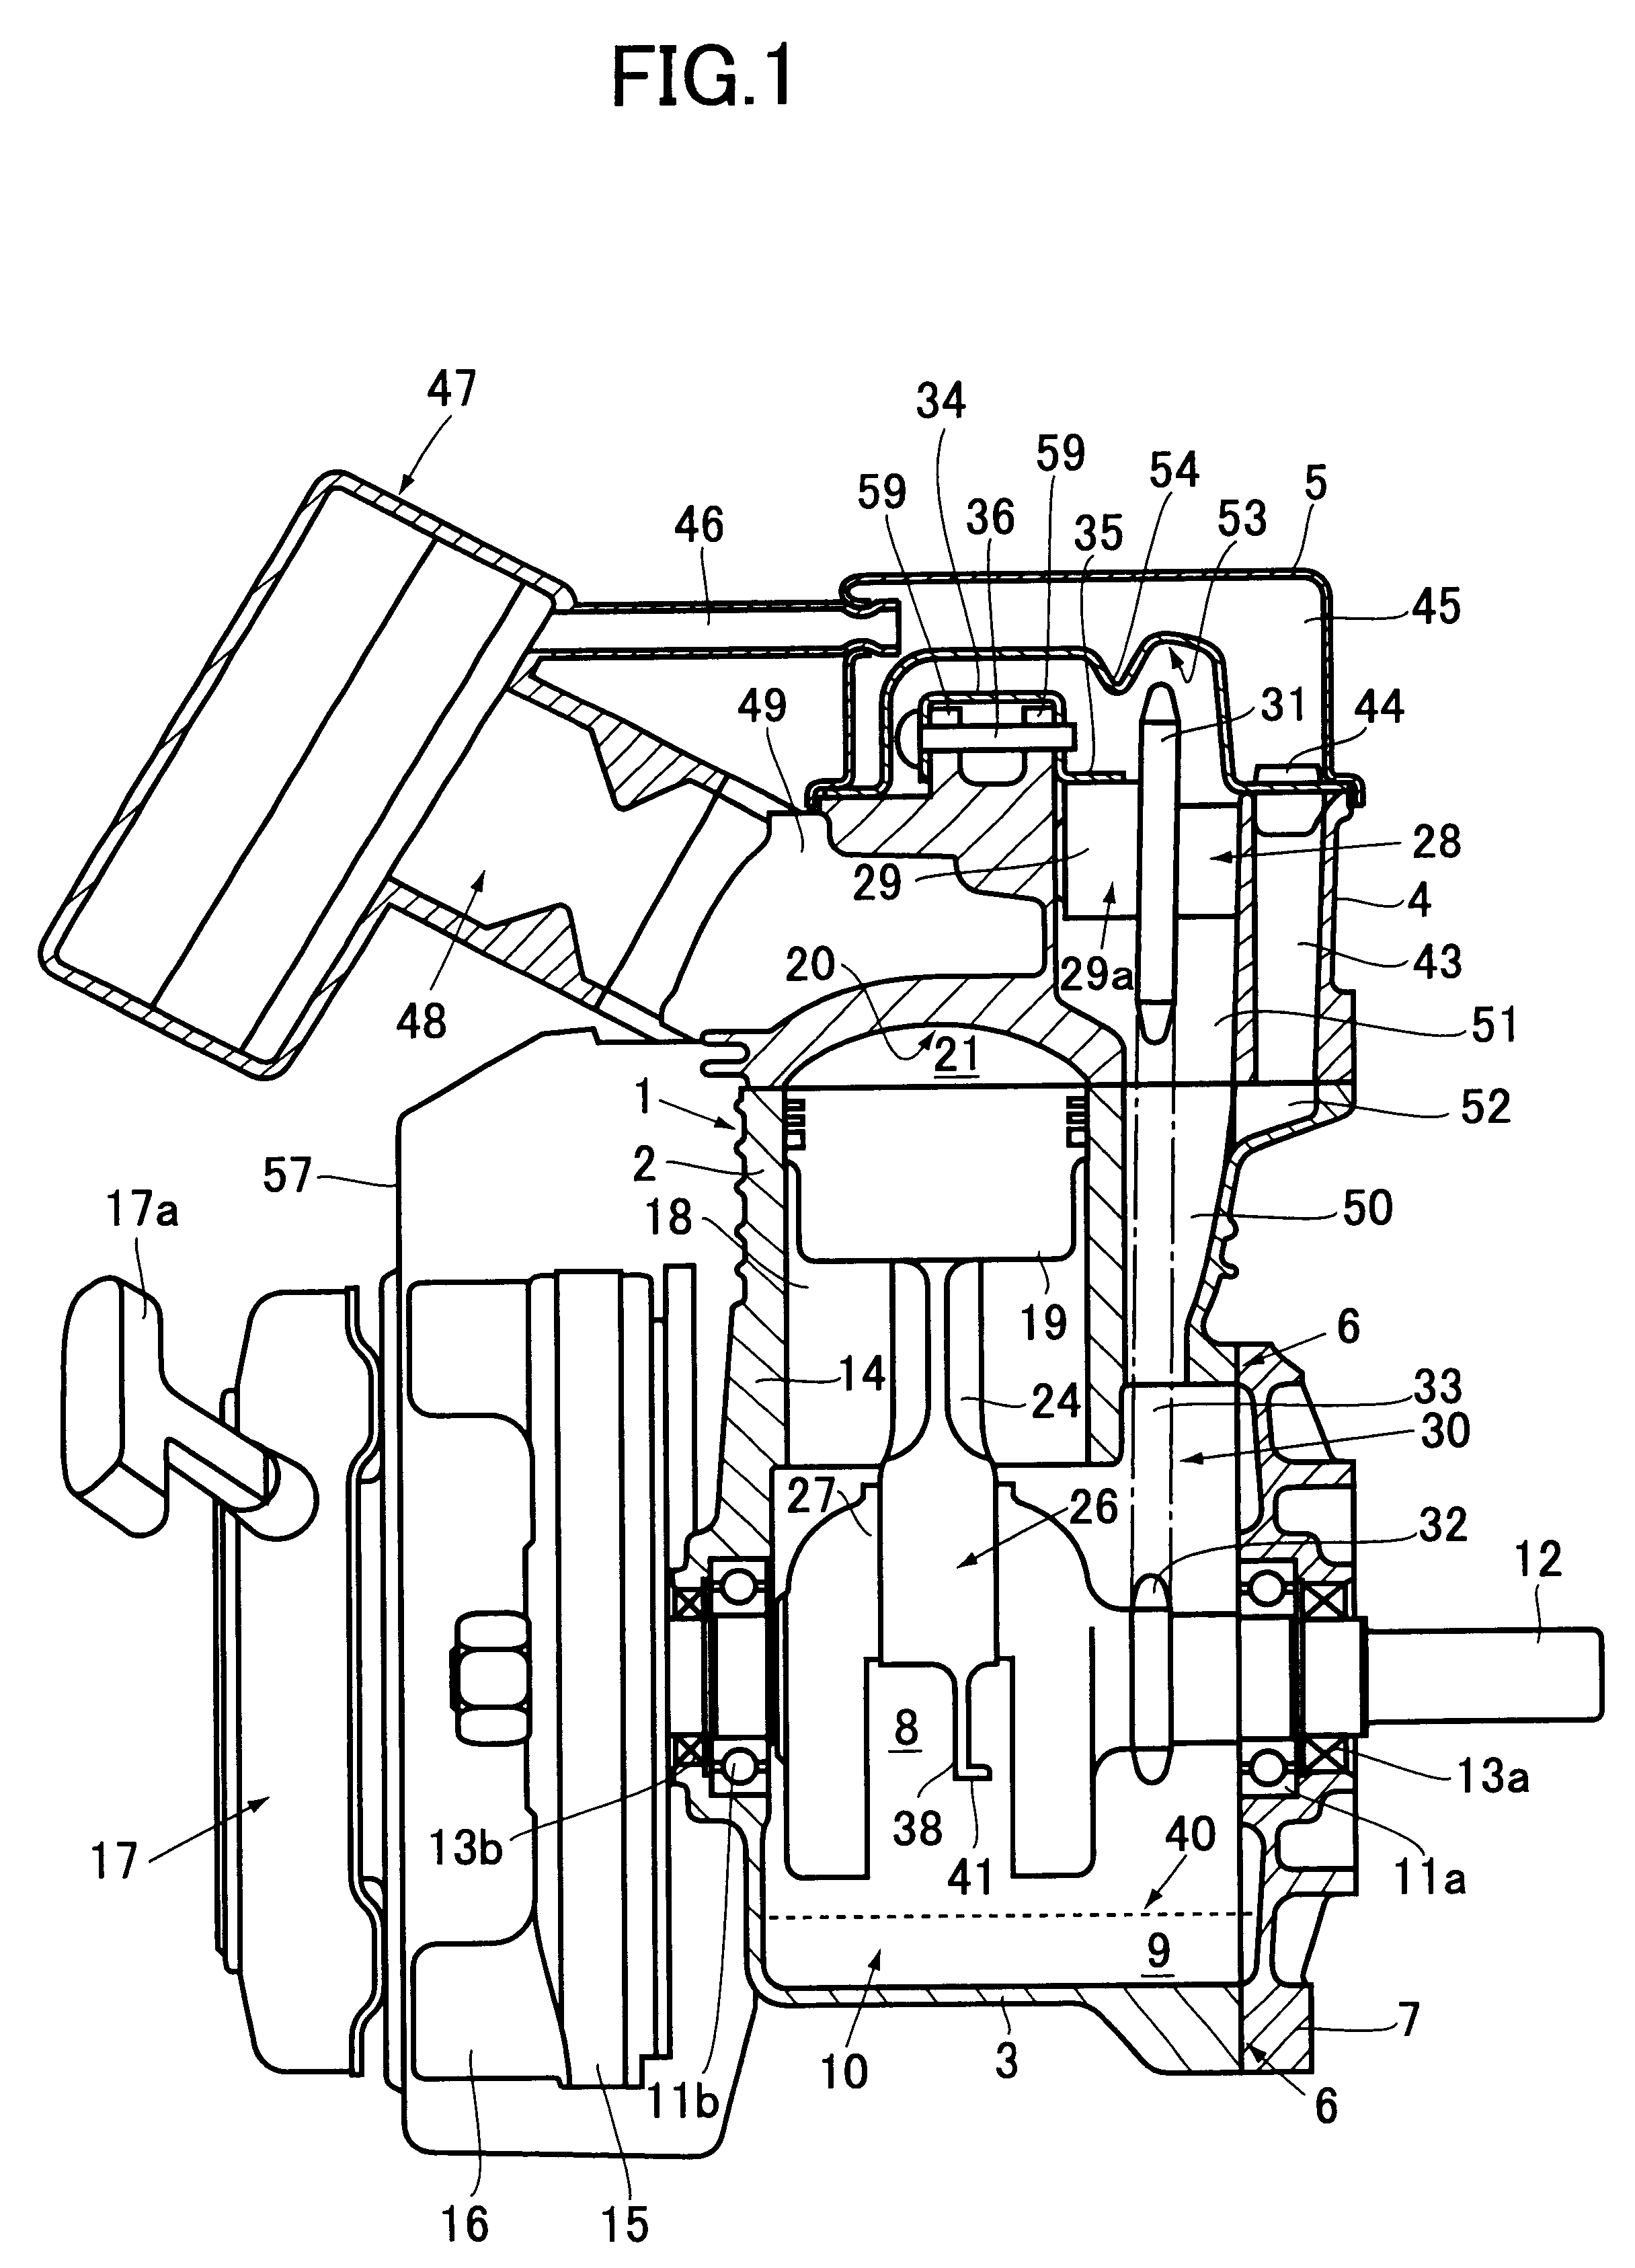 Lubricating system for OHC engine